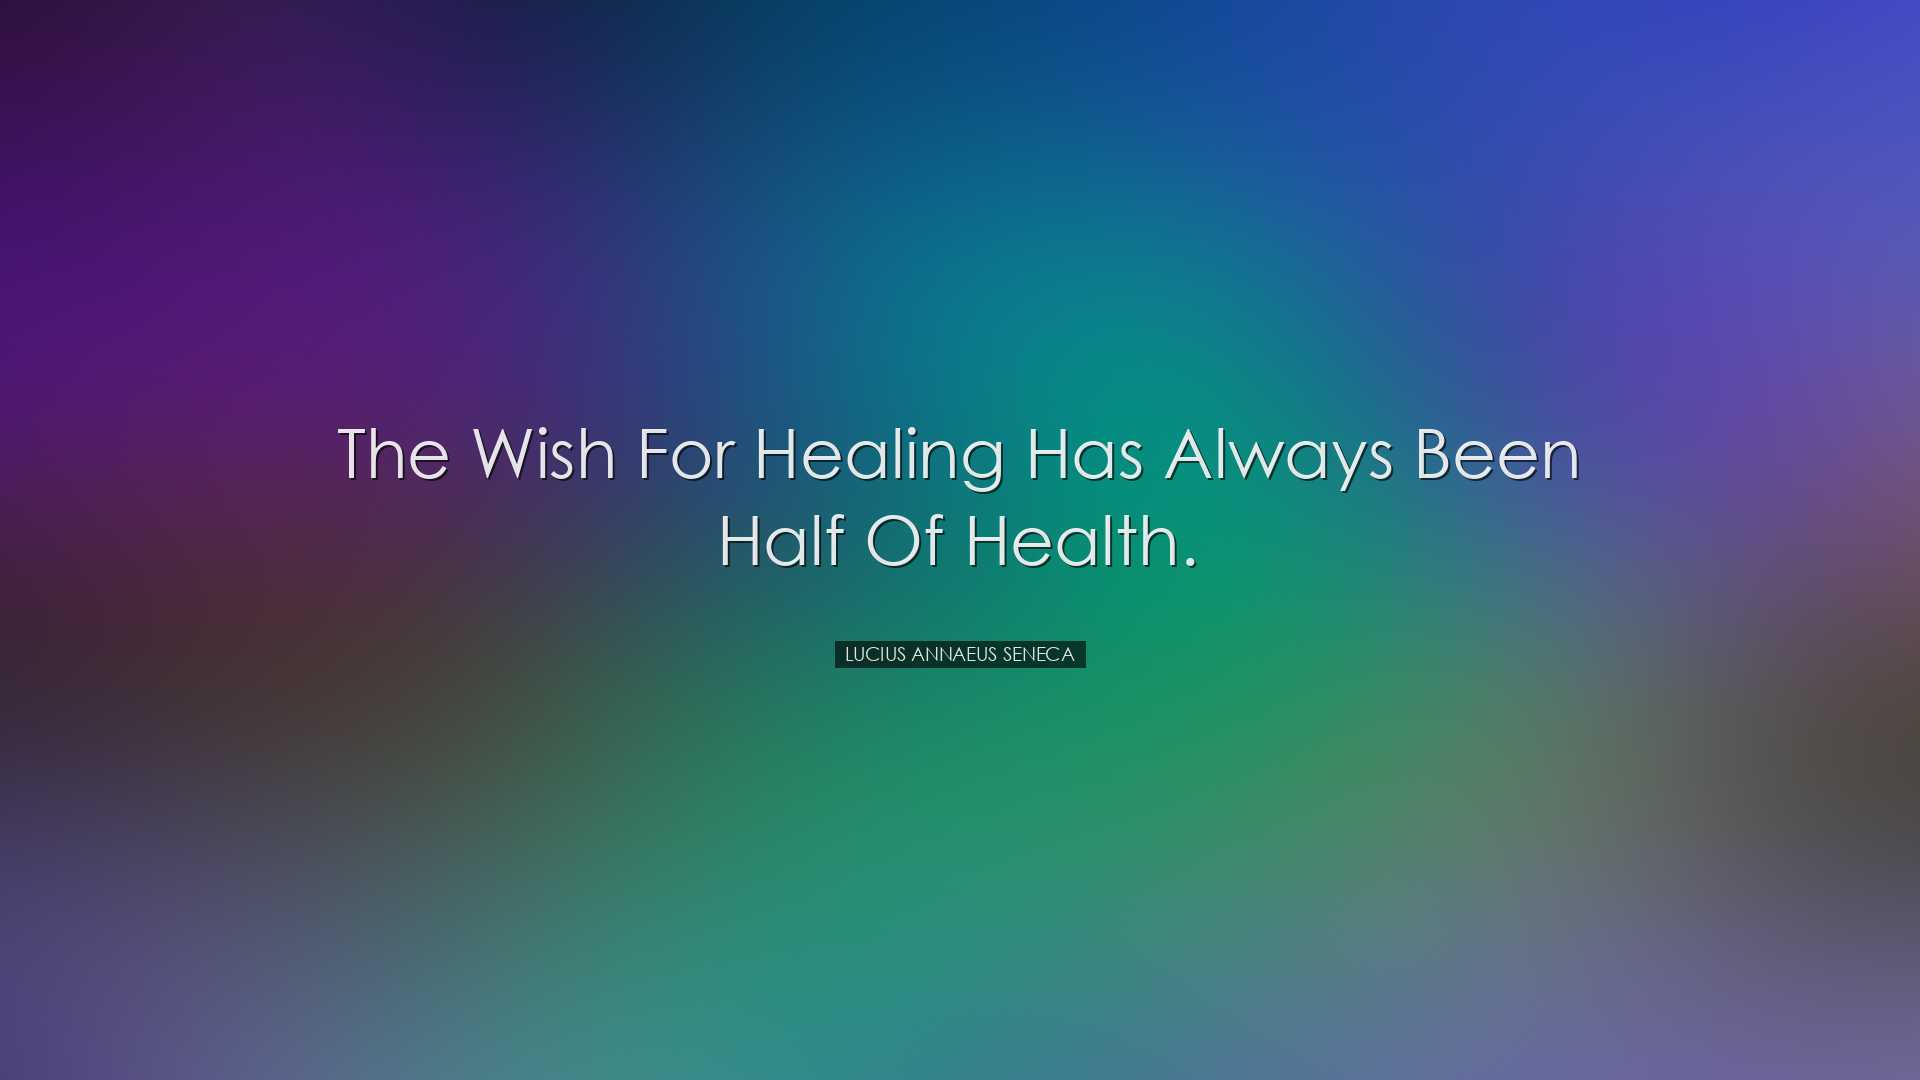 The wish for healing has always been half of health. - Lucius Anna